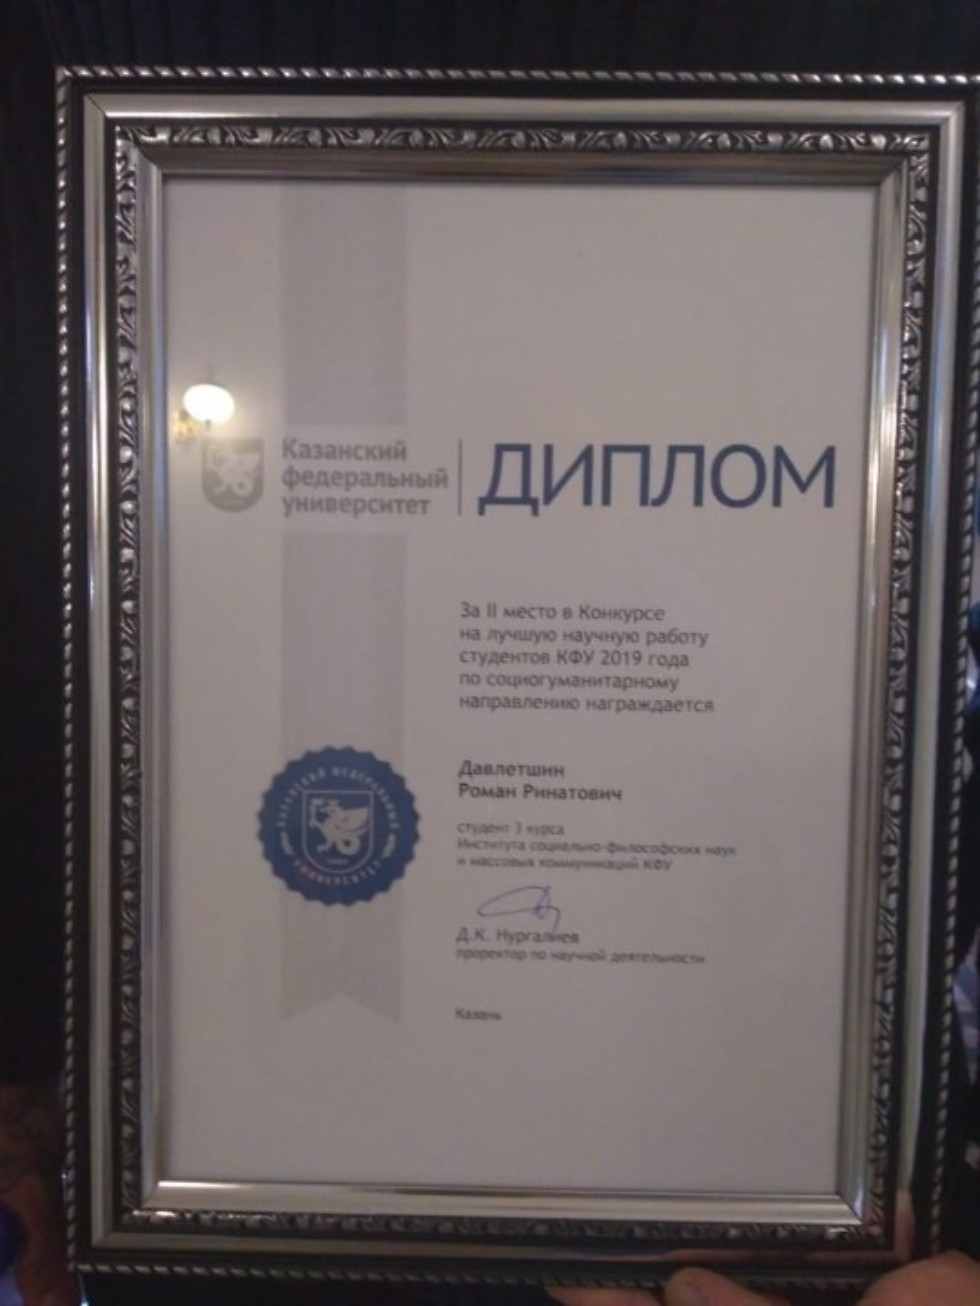 Department of Religious Studies student took the II place in the competition for the best scientific work of Kazan Federal University